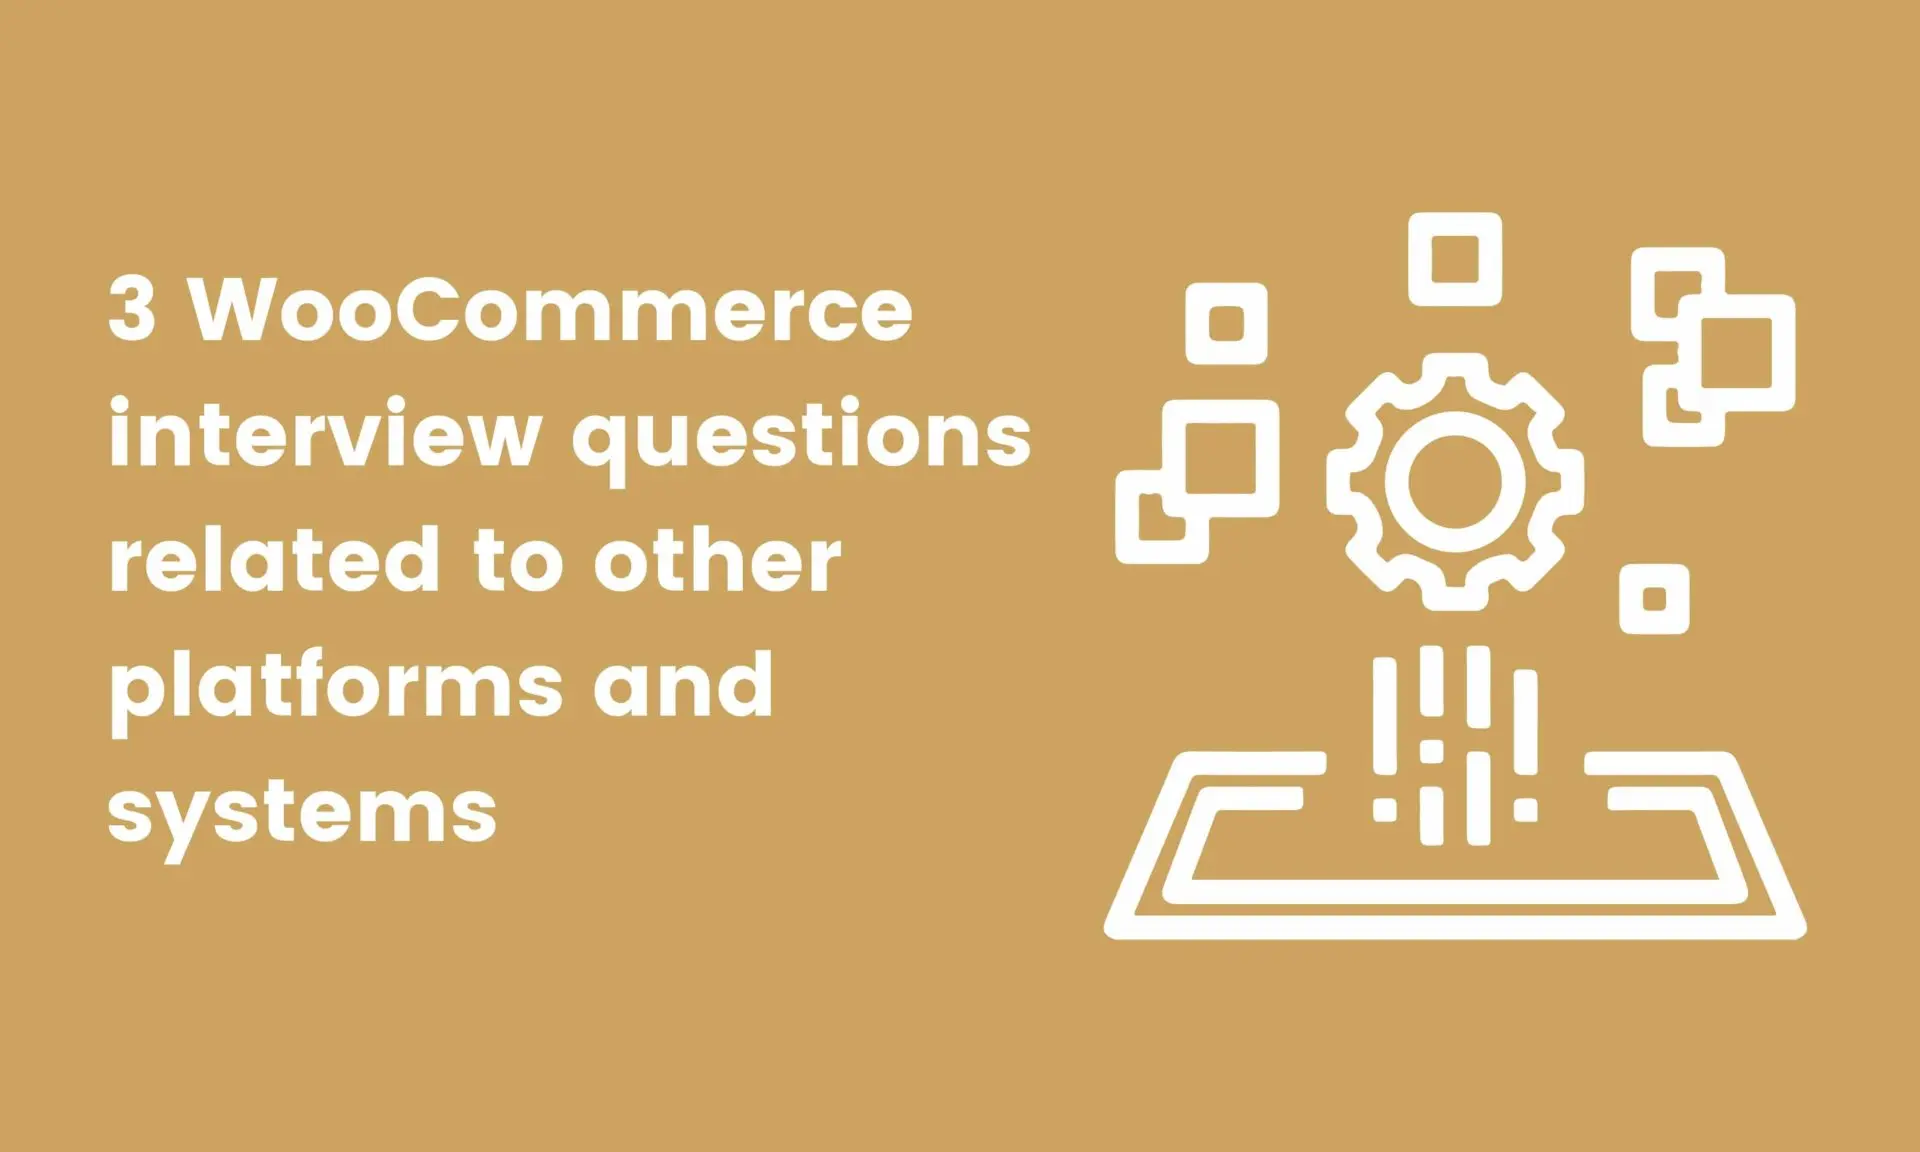 image showing 3 WooCommerce interview questions related to other platforms and systems